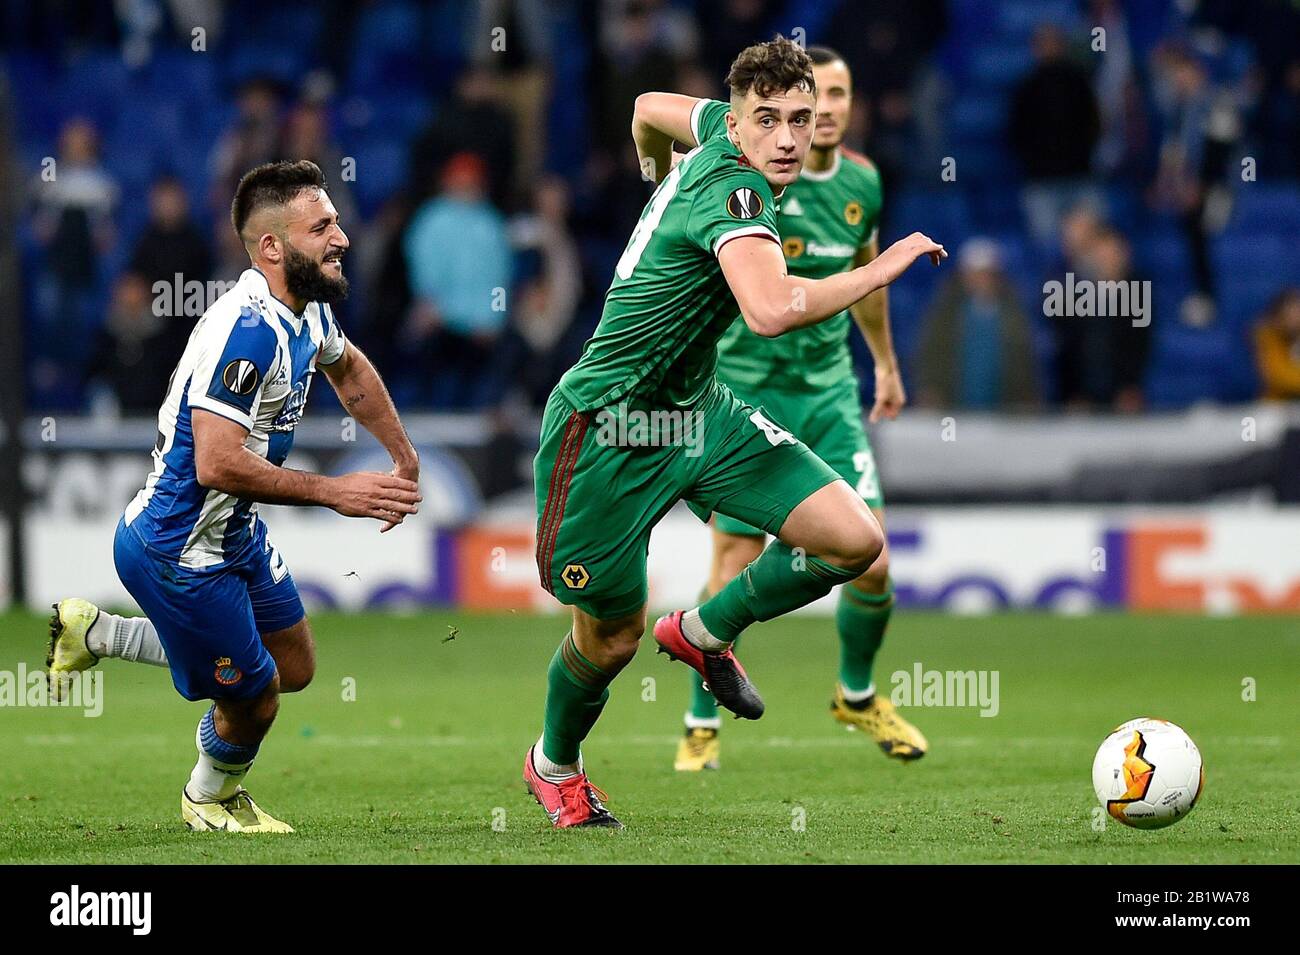 Barcelona, Spain. 27th Feb 2020.  Matias Vargas of RCD Espanyol and Max Kilman of Wolverhampton Wanderers F.C. during the UEFA Europa League round of 32 second leg match between RCD Espanyol and Wolverhampton Wanderers at RCD Stadium on February 27, 2020 in Barcelona, Spain. Credit: Dax Images/Alamy Live News Stock Photo